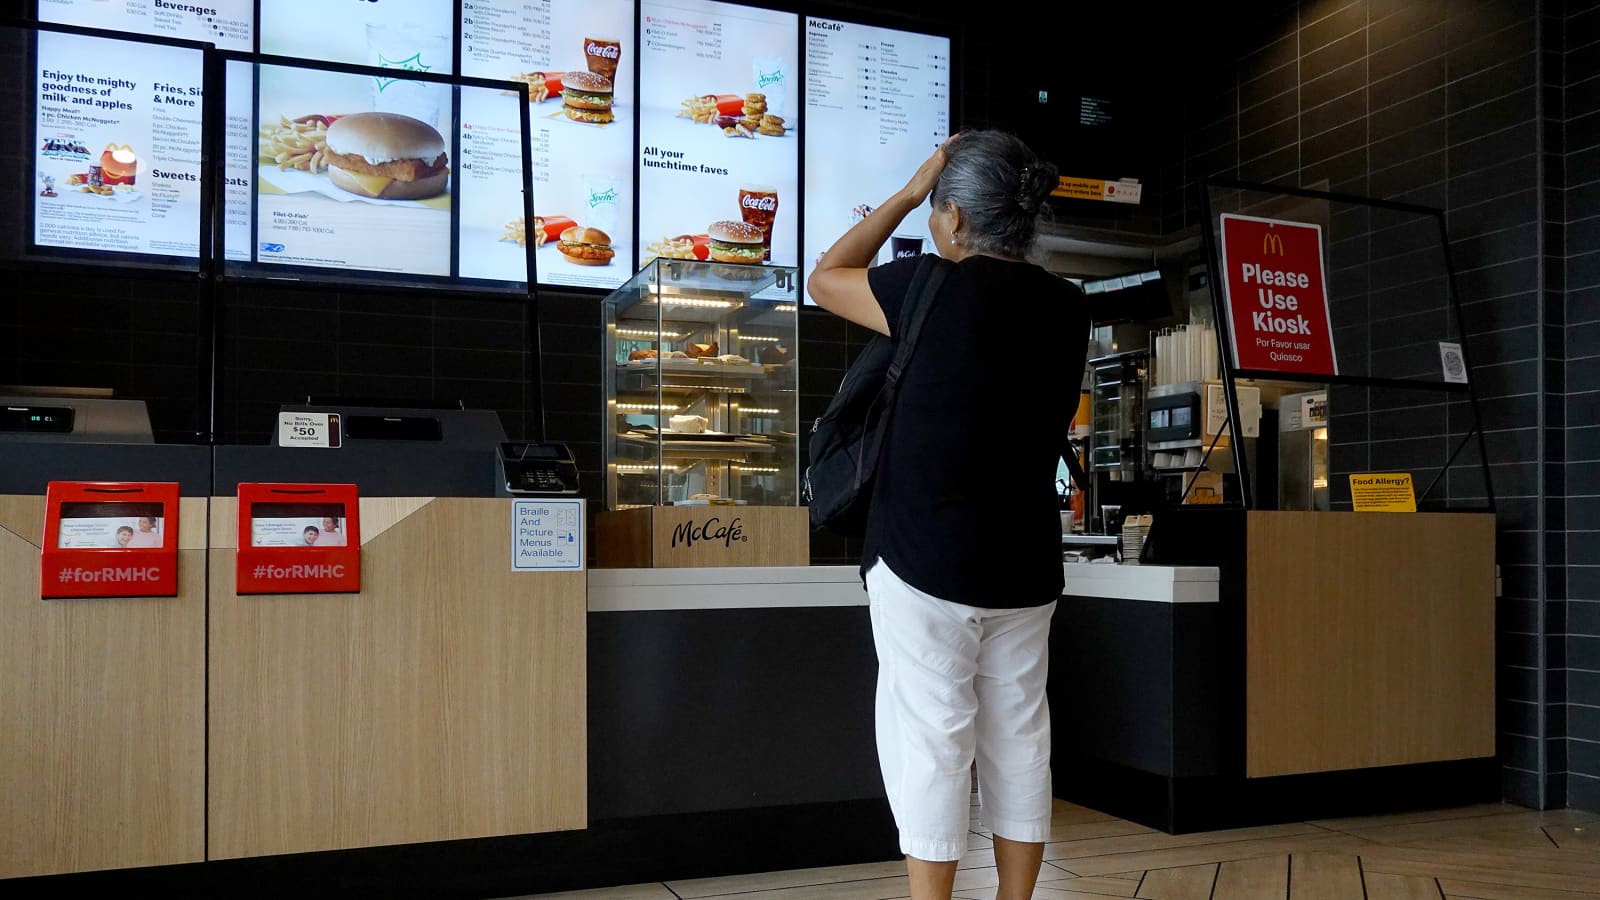 Higher prices, skimpier portions, apps — fast-food deals are changing